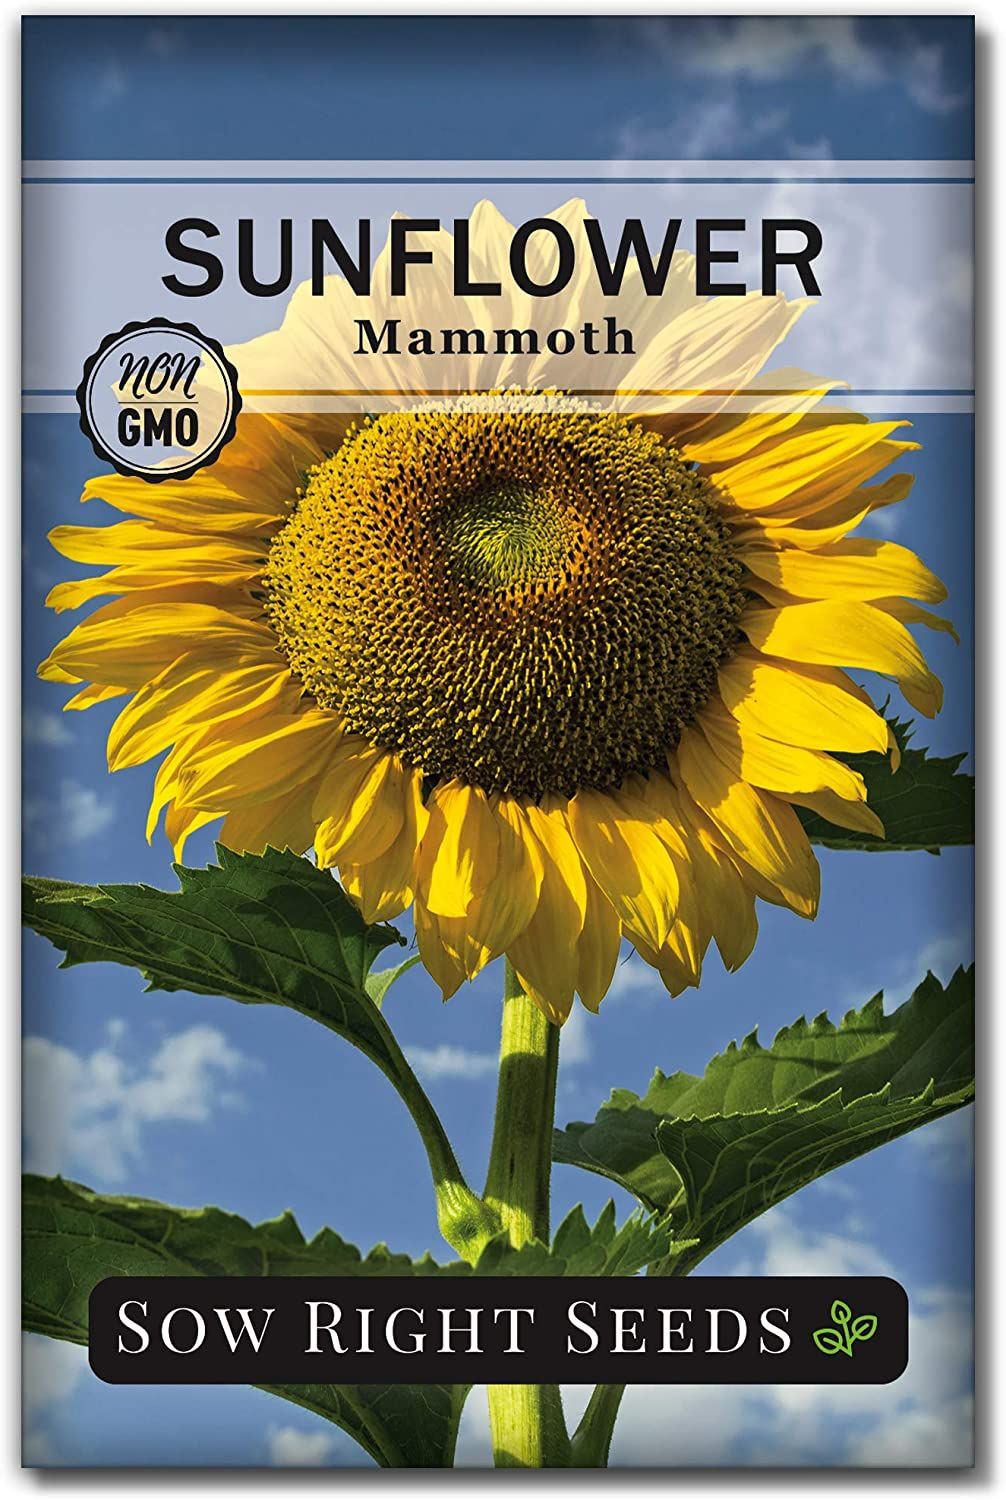 Sow Right Seeds Mammoth Sunflower Seeds - $$title$$